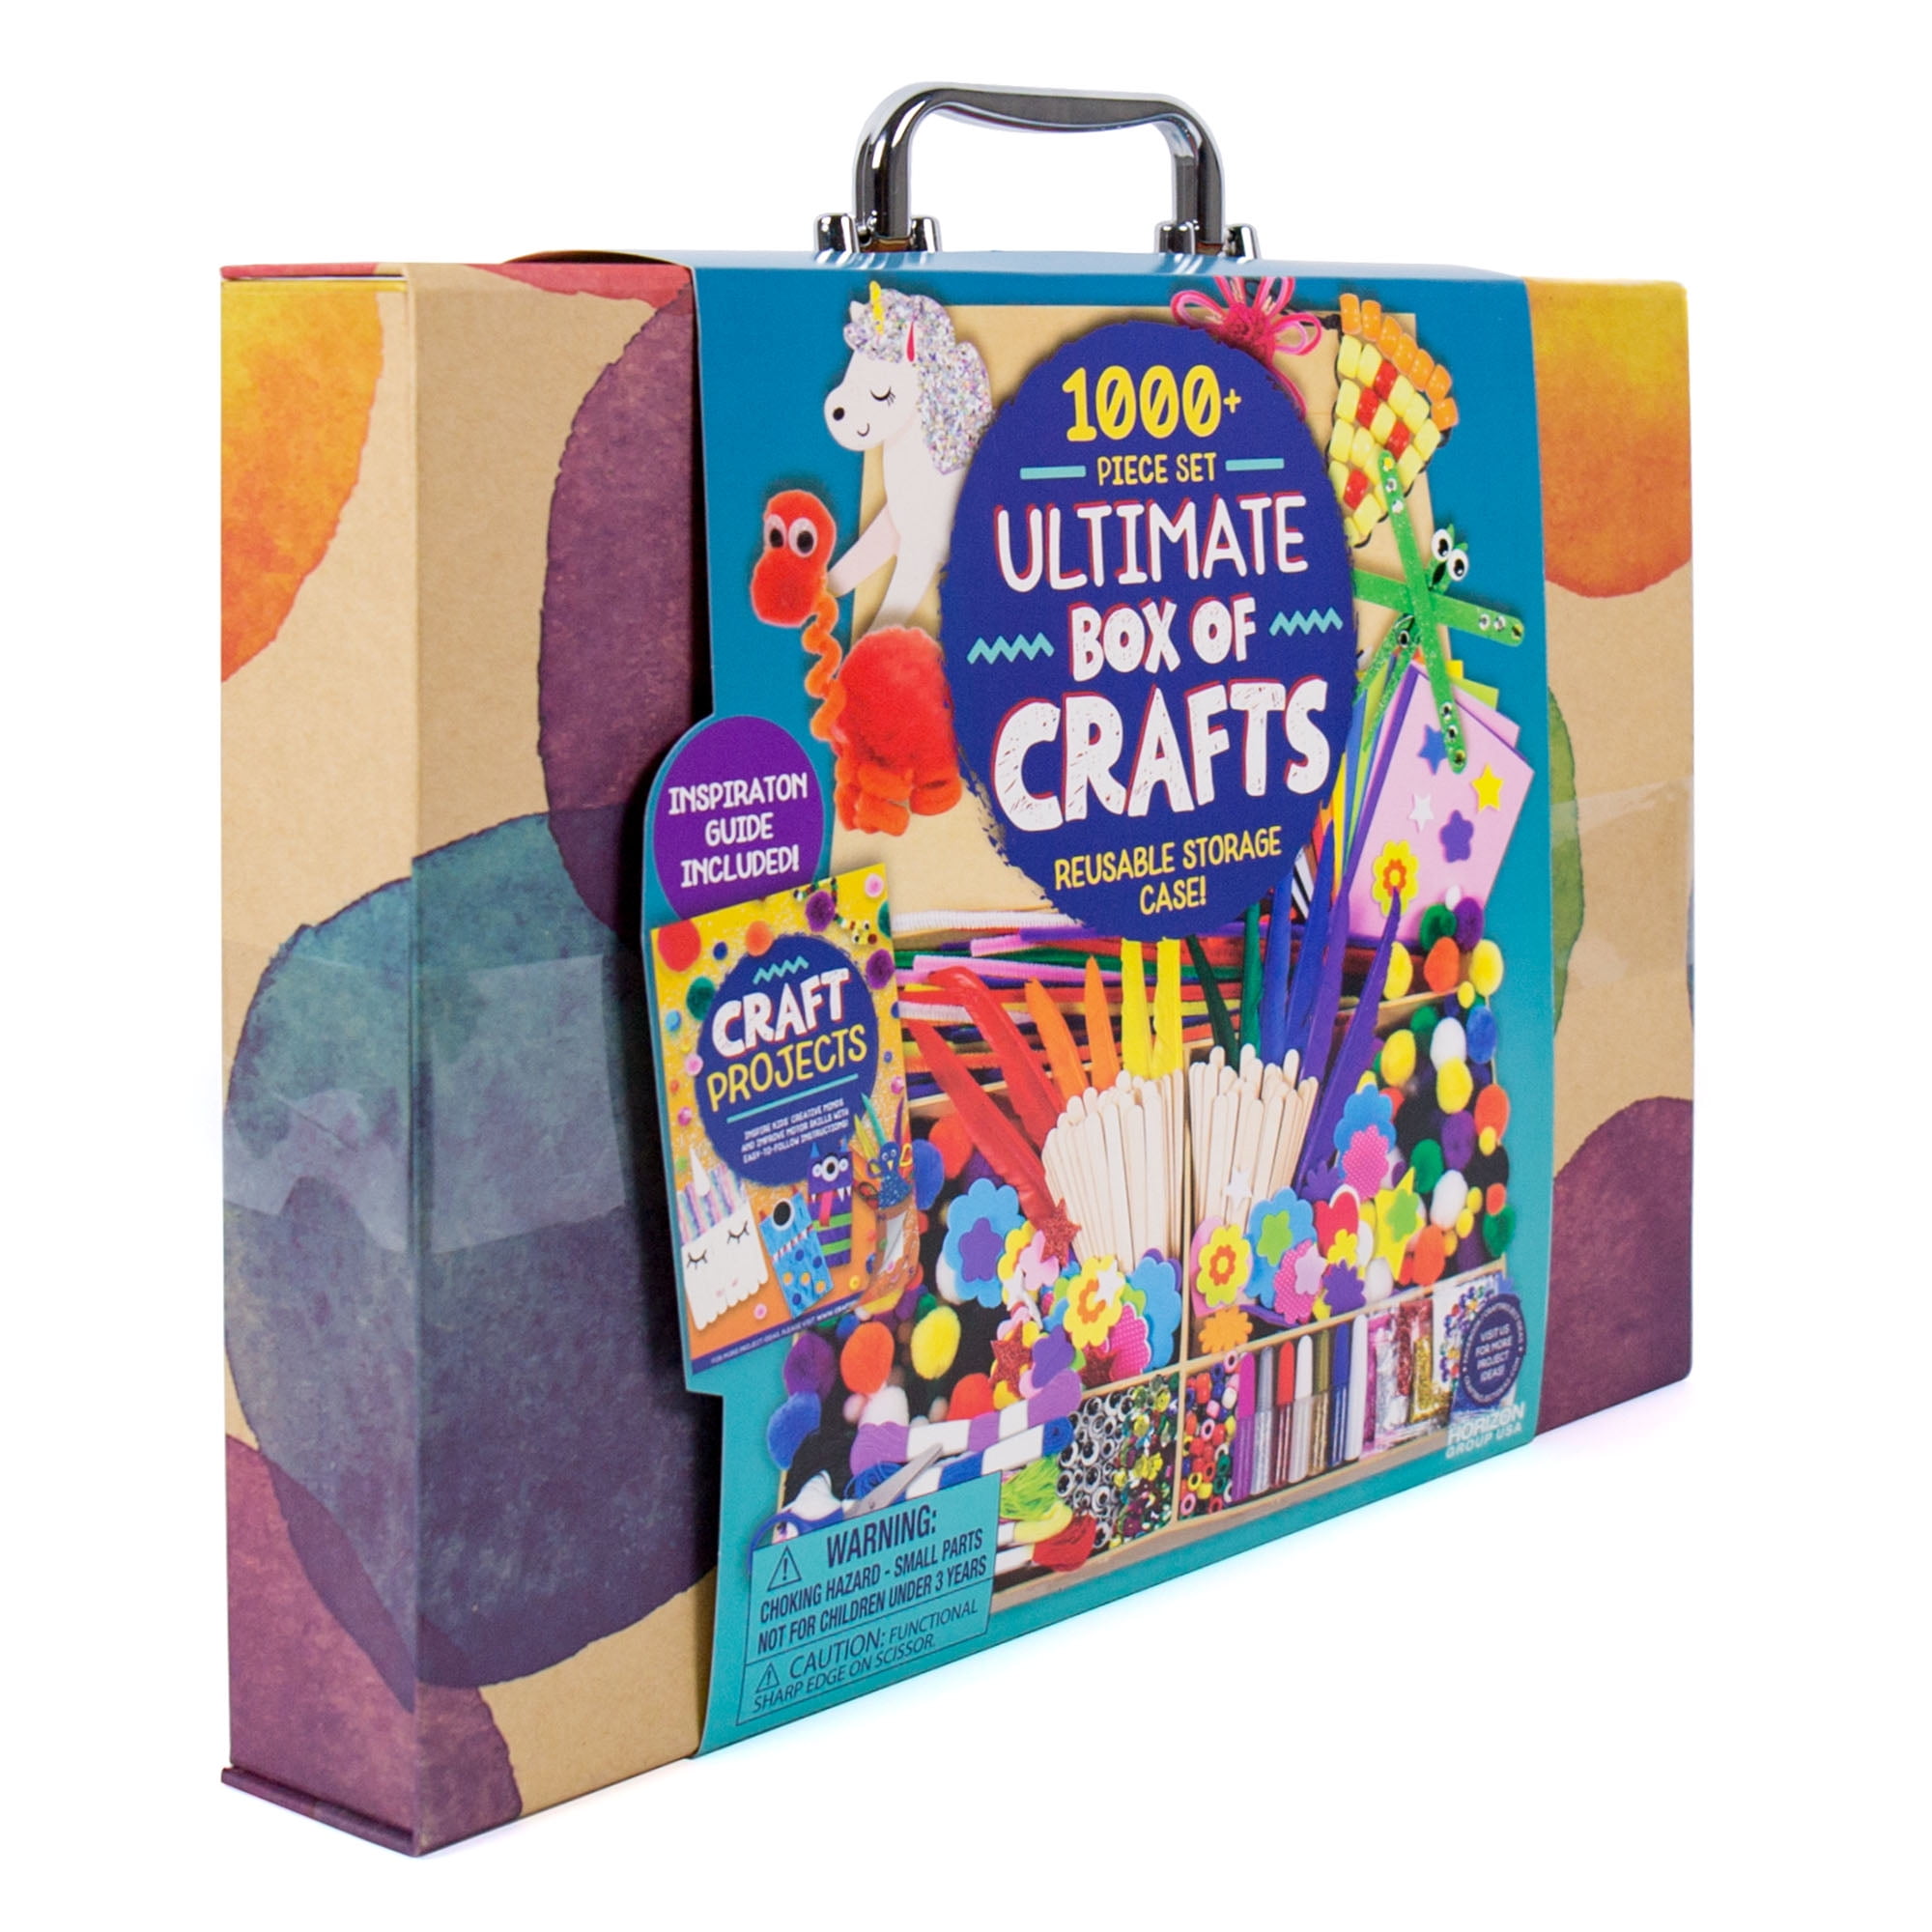  READY 2 LEARN Big Craft Combo Box - 800+ Pieces - 16 Projects  for Kids Ages 4-8 - All in One Craft Kit - Paper Bag Puppets, Dough  Creations and More! : Toys & Games